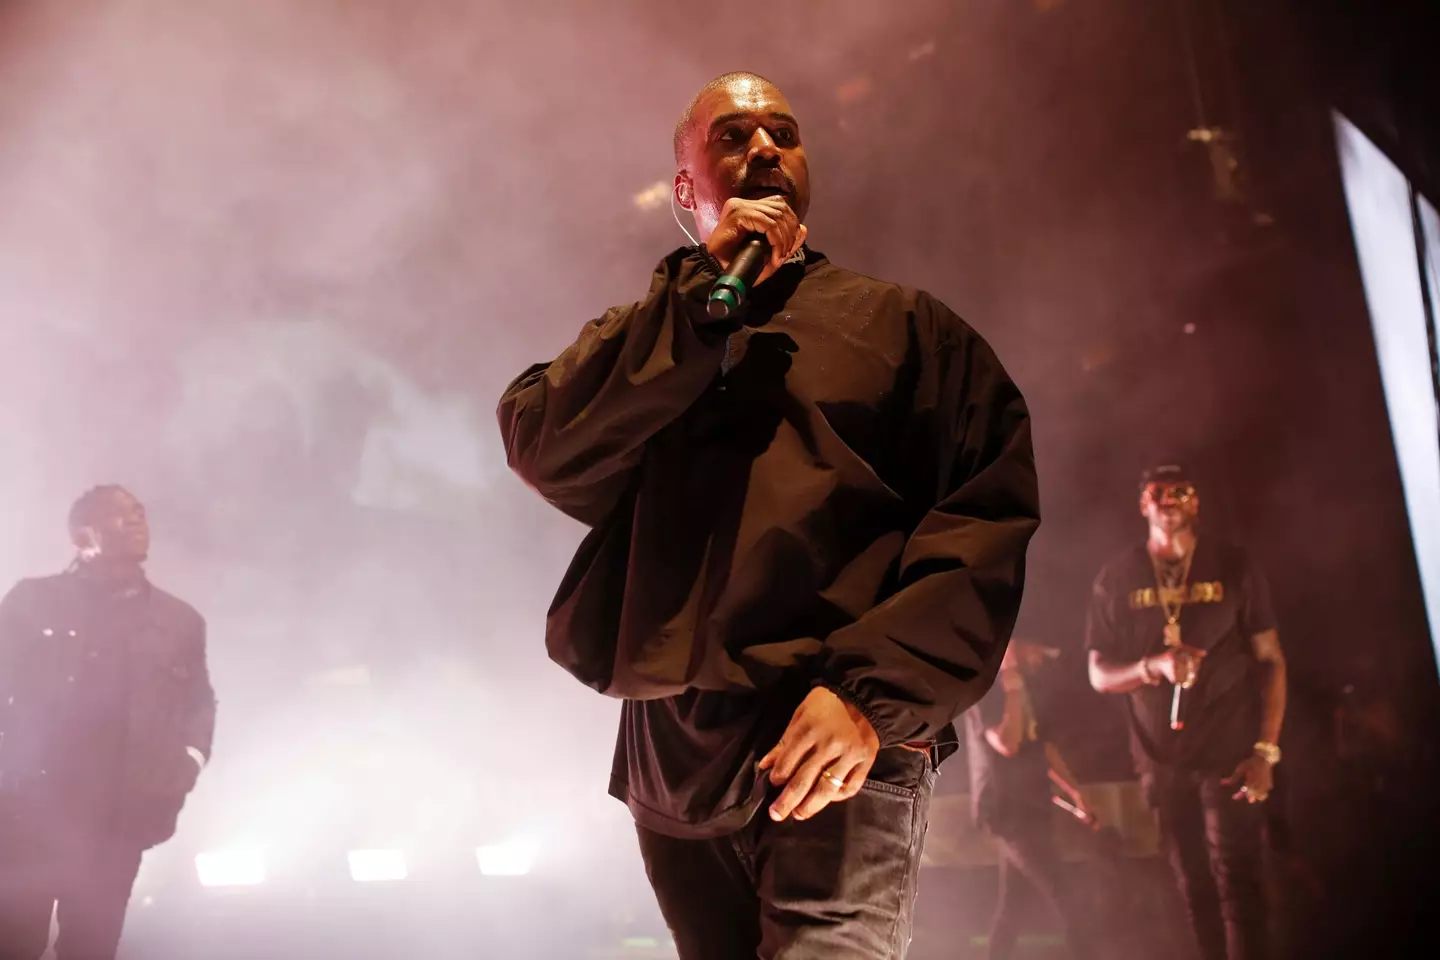 West sparked controversy with his comments made online.